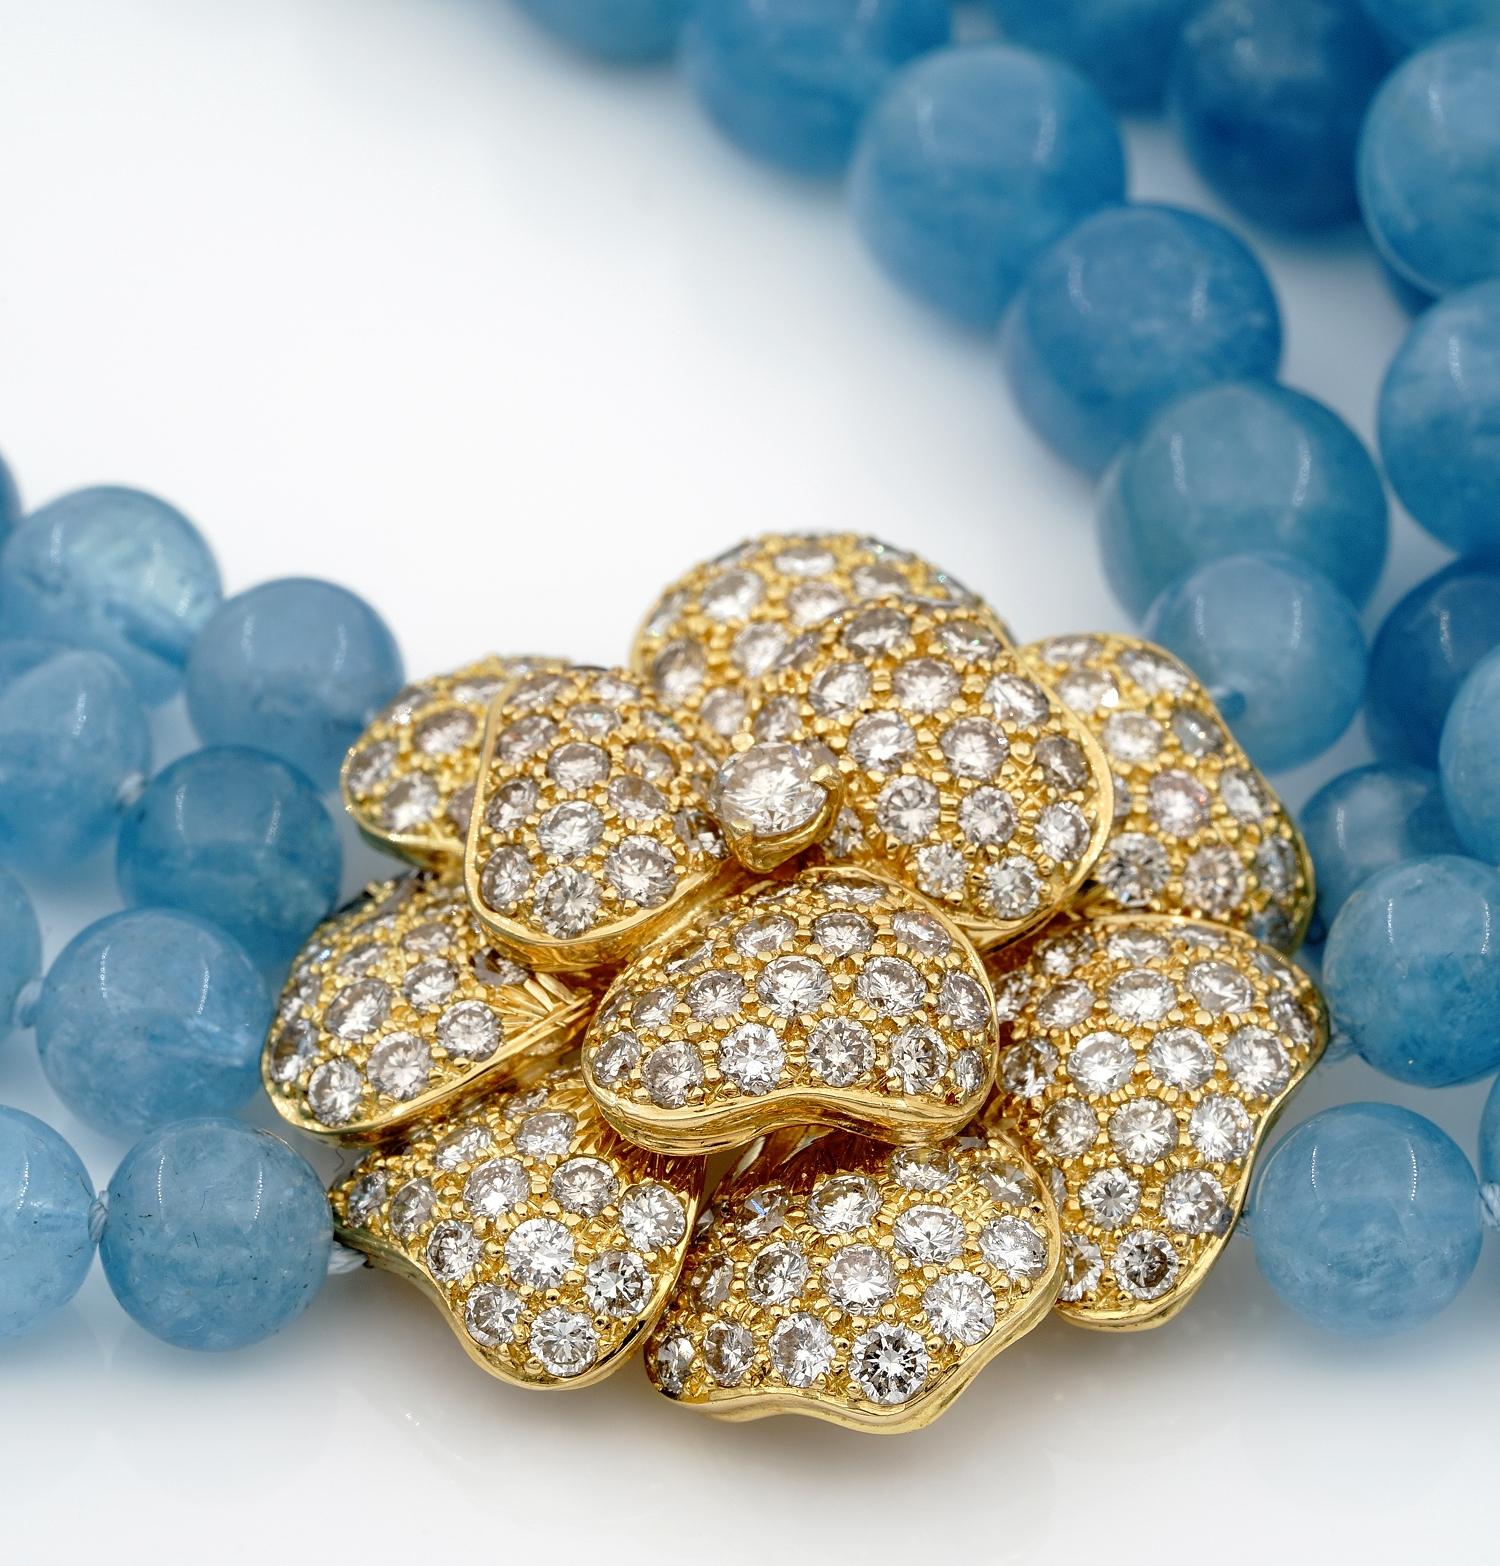 Luxury Connection

The house of Giovane has forged its name with exquisite jewelry crafted in one of Italy’s oldest and most esteemed workshops. For this exclusive collection, amazing and rare stones meet time-honored craftsmanship
This high end,